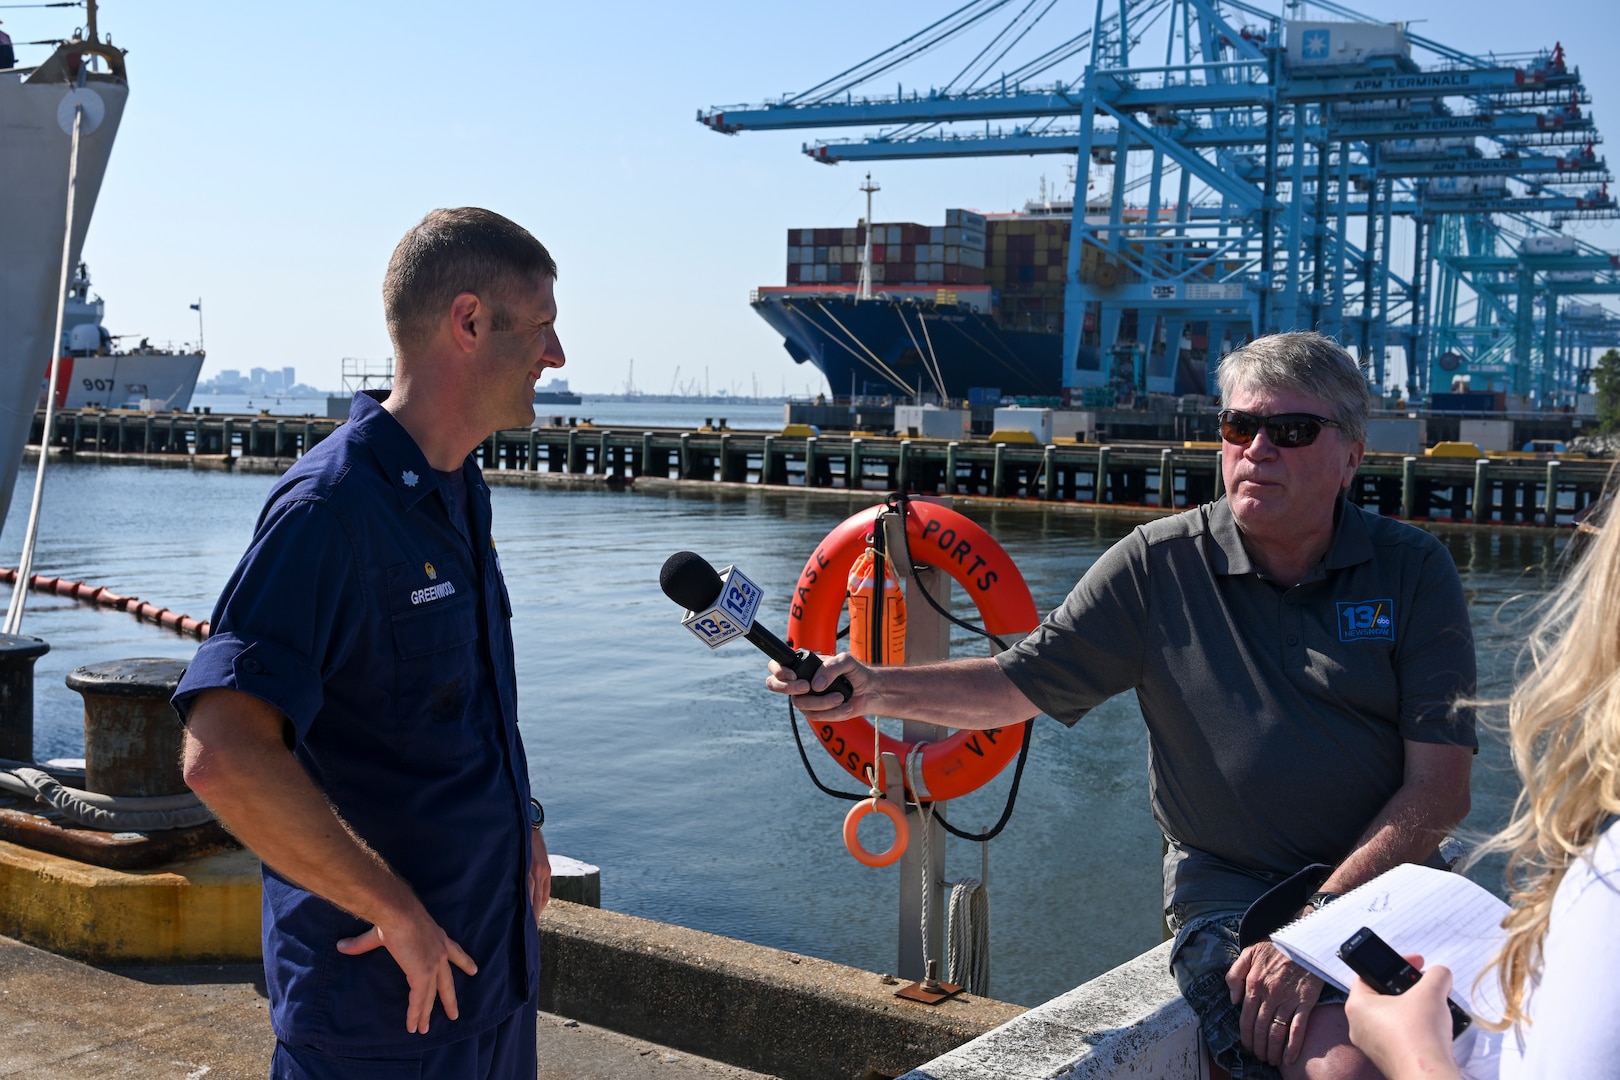 U.S. Coast Guard Cmdr. Jeremy Greenwood, left, the commanding officer of USCGC Legare (WMEC 912), speaks with Mike Gooding, right, a reporter, at the unit's return to home port, July 13, 2023, at Coast Guard Base Portsmouth. While underway, Legare’s crew conducted maritime safety and security missions while working to detect, deter and intercept unsafe and illegal maritime migration ventures bound for the United States. (U.S. Coast Guard photo by Petty Officer 3rd Class Kate Kilroy)